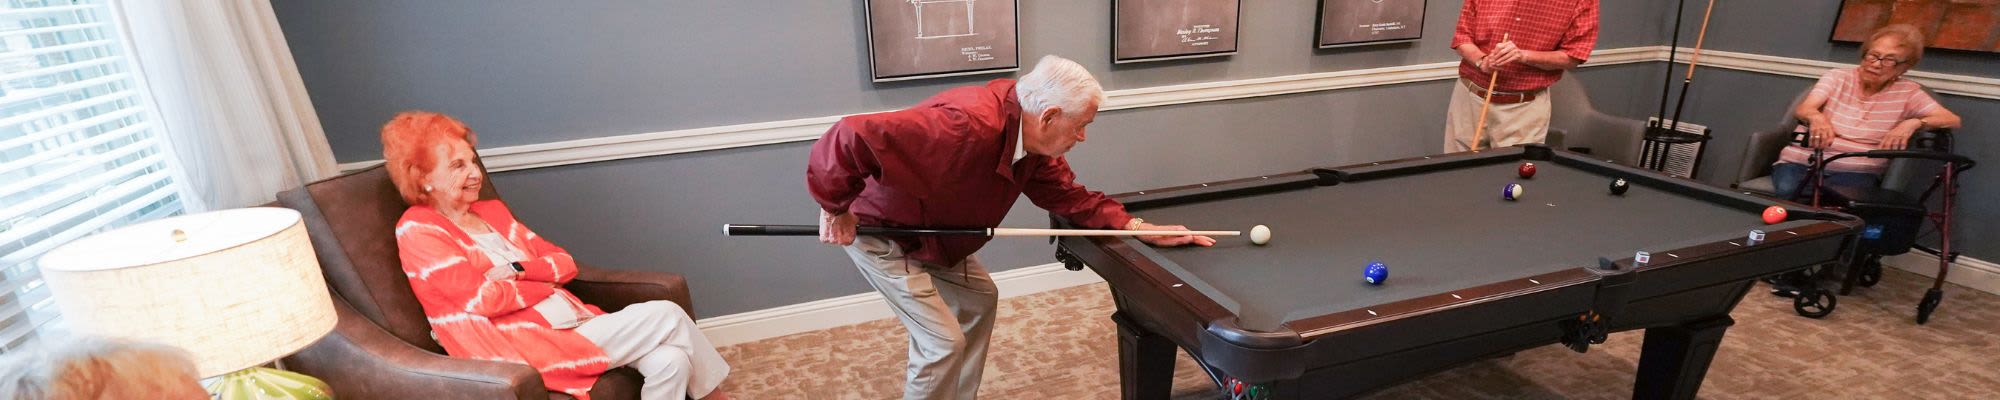 Activities & Events at The Harmony Collection at Roanoke - Assisted Living in Roanoke, Virginia